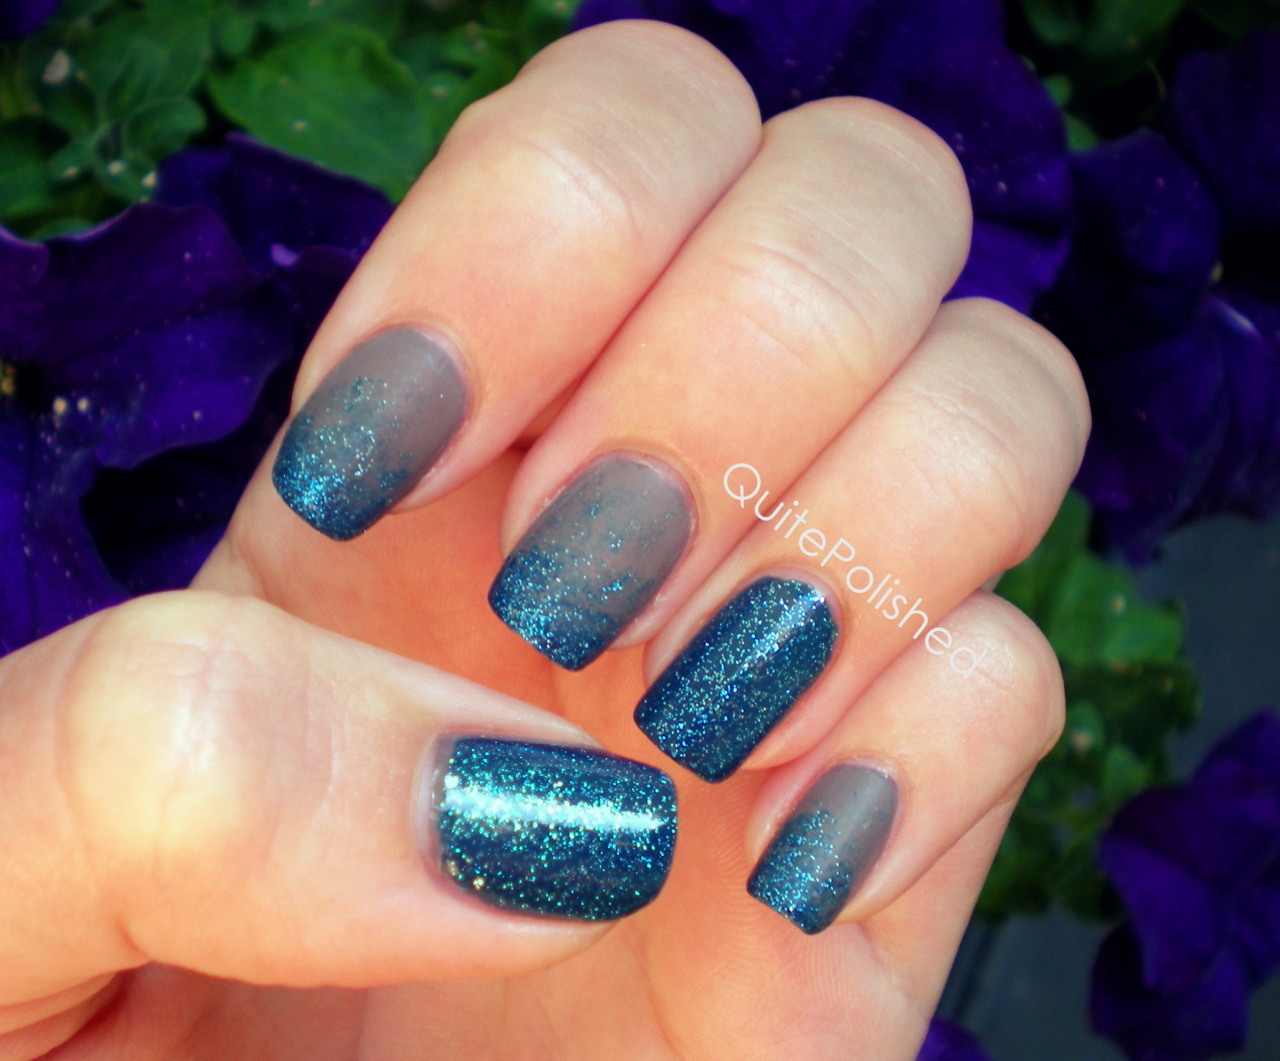 There is one coat on my thumb and ring finger over two coats of Zoya Petra,